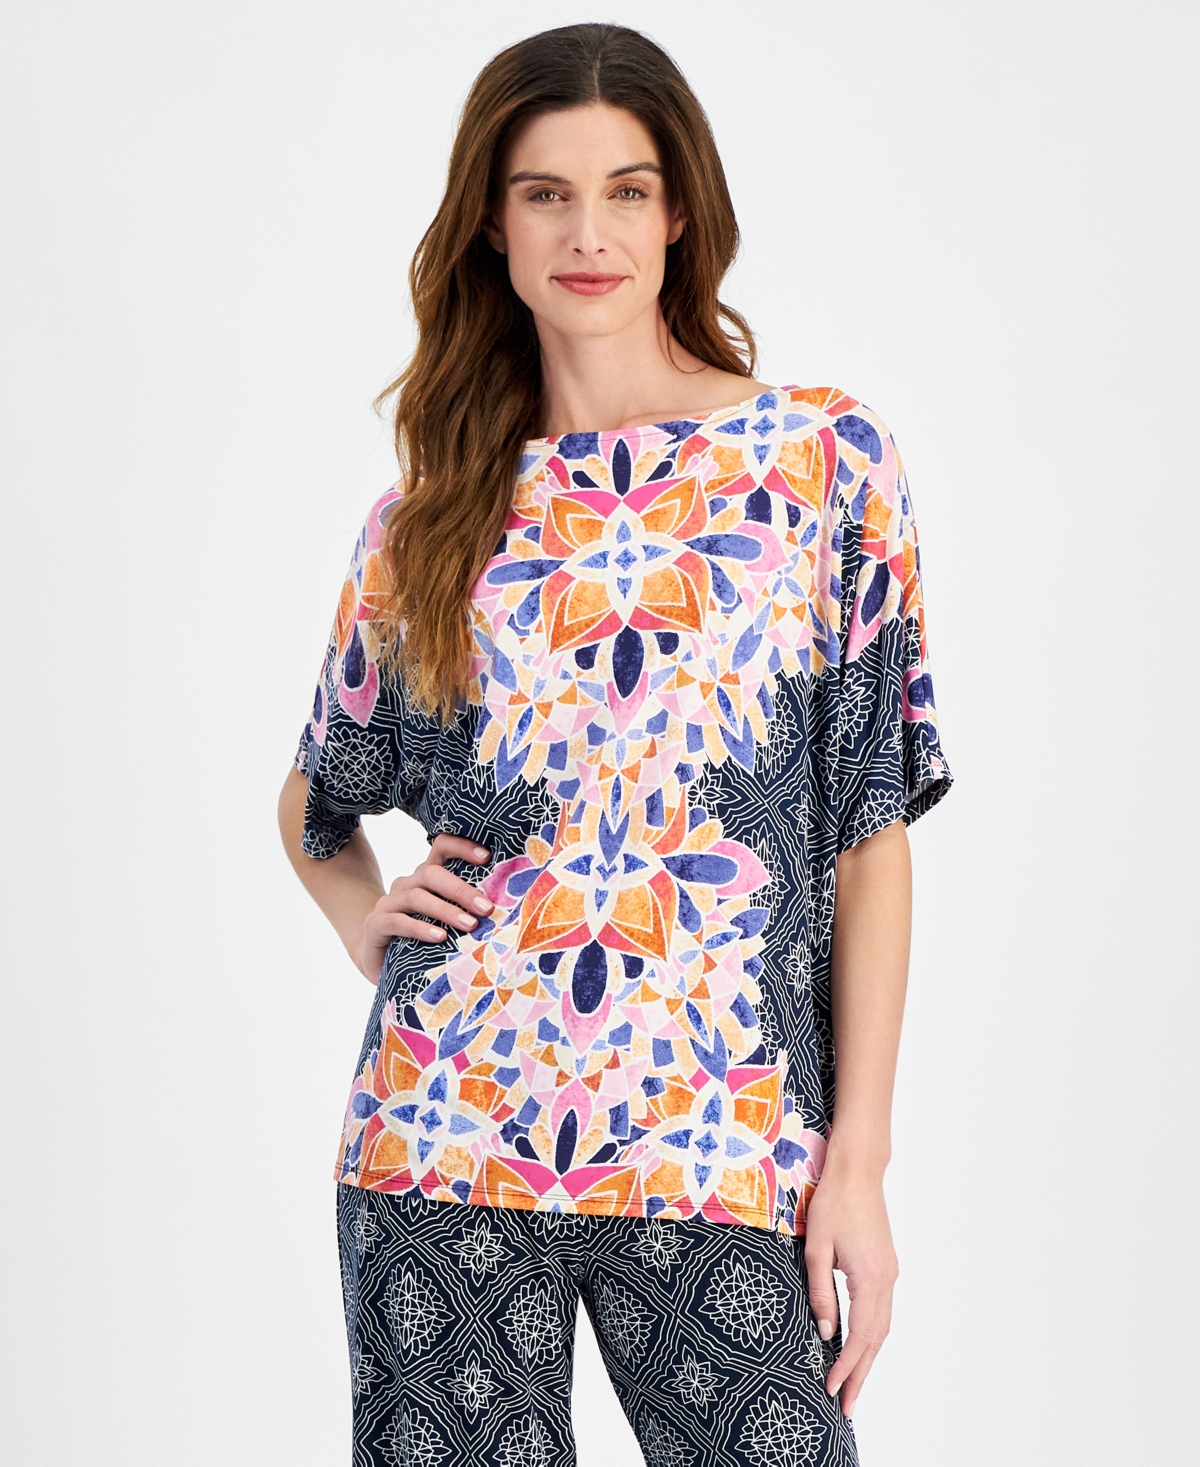 Women's Short-Sleeve Printed Dolman-Sleeve Top, Created for Macy's - Intrepid Blue Combo